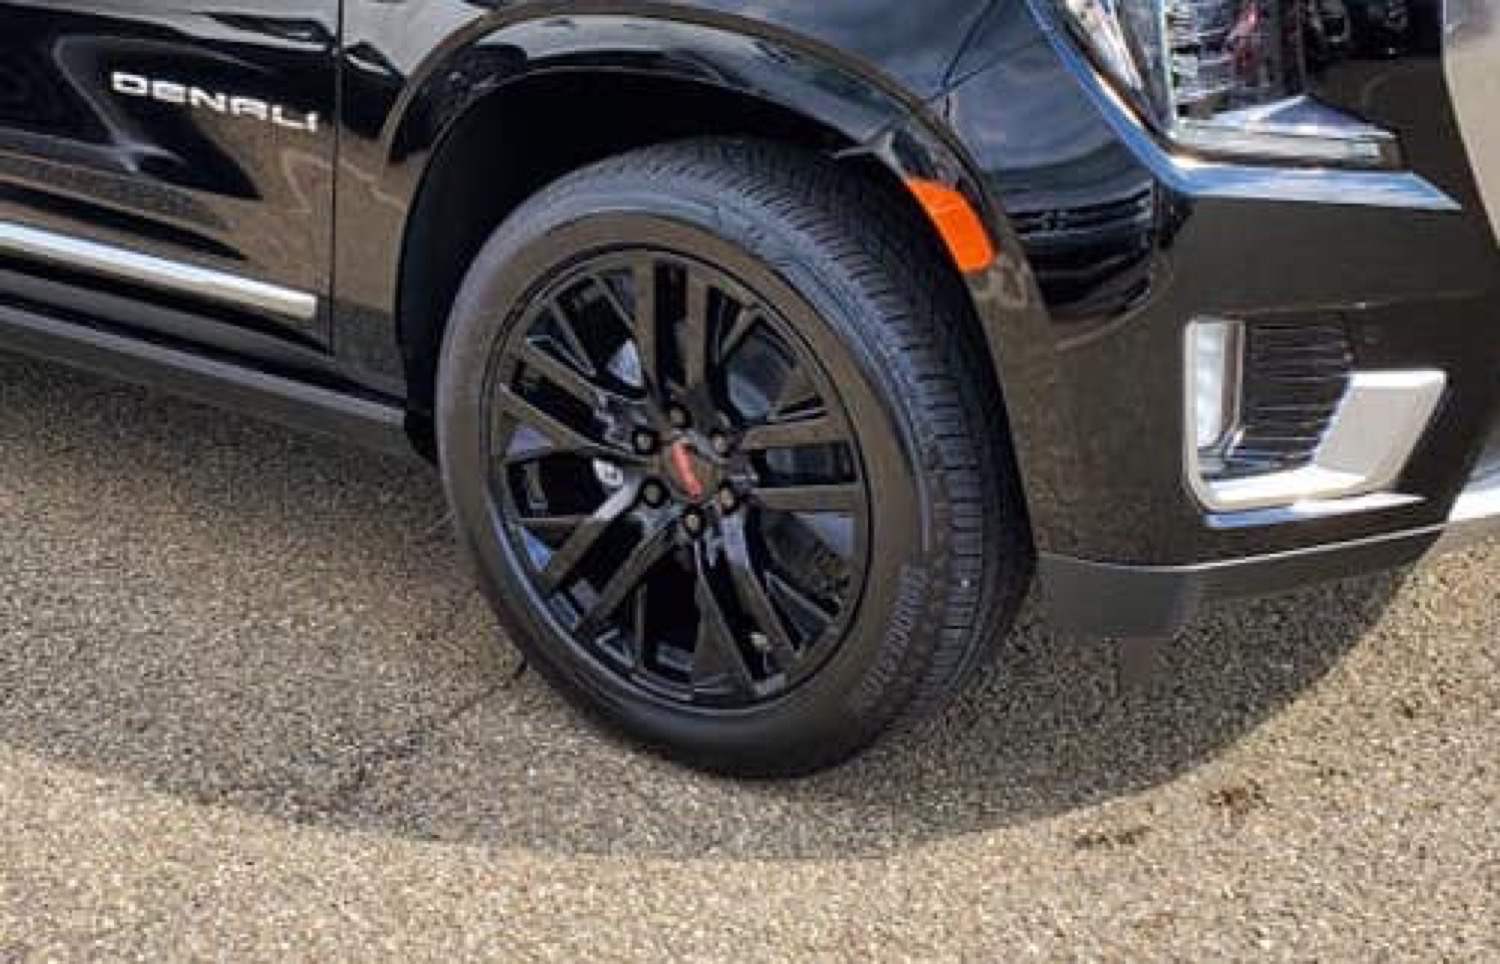 All Dealer-Installed 22-Inch GM Wheels Are Unavailable To Order